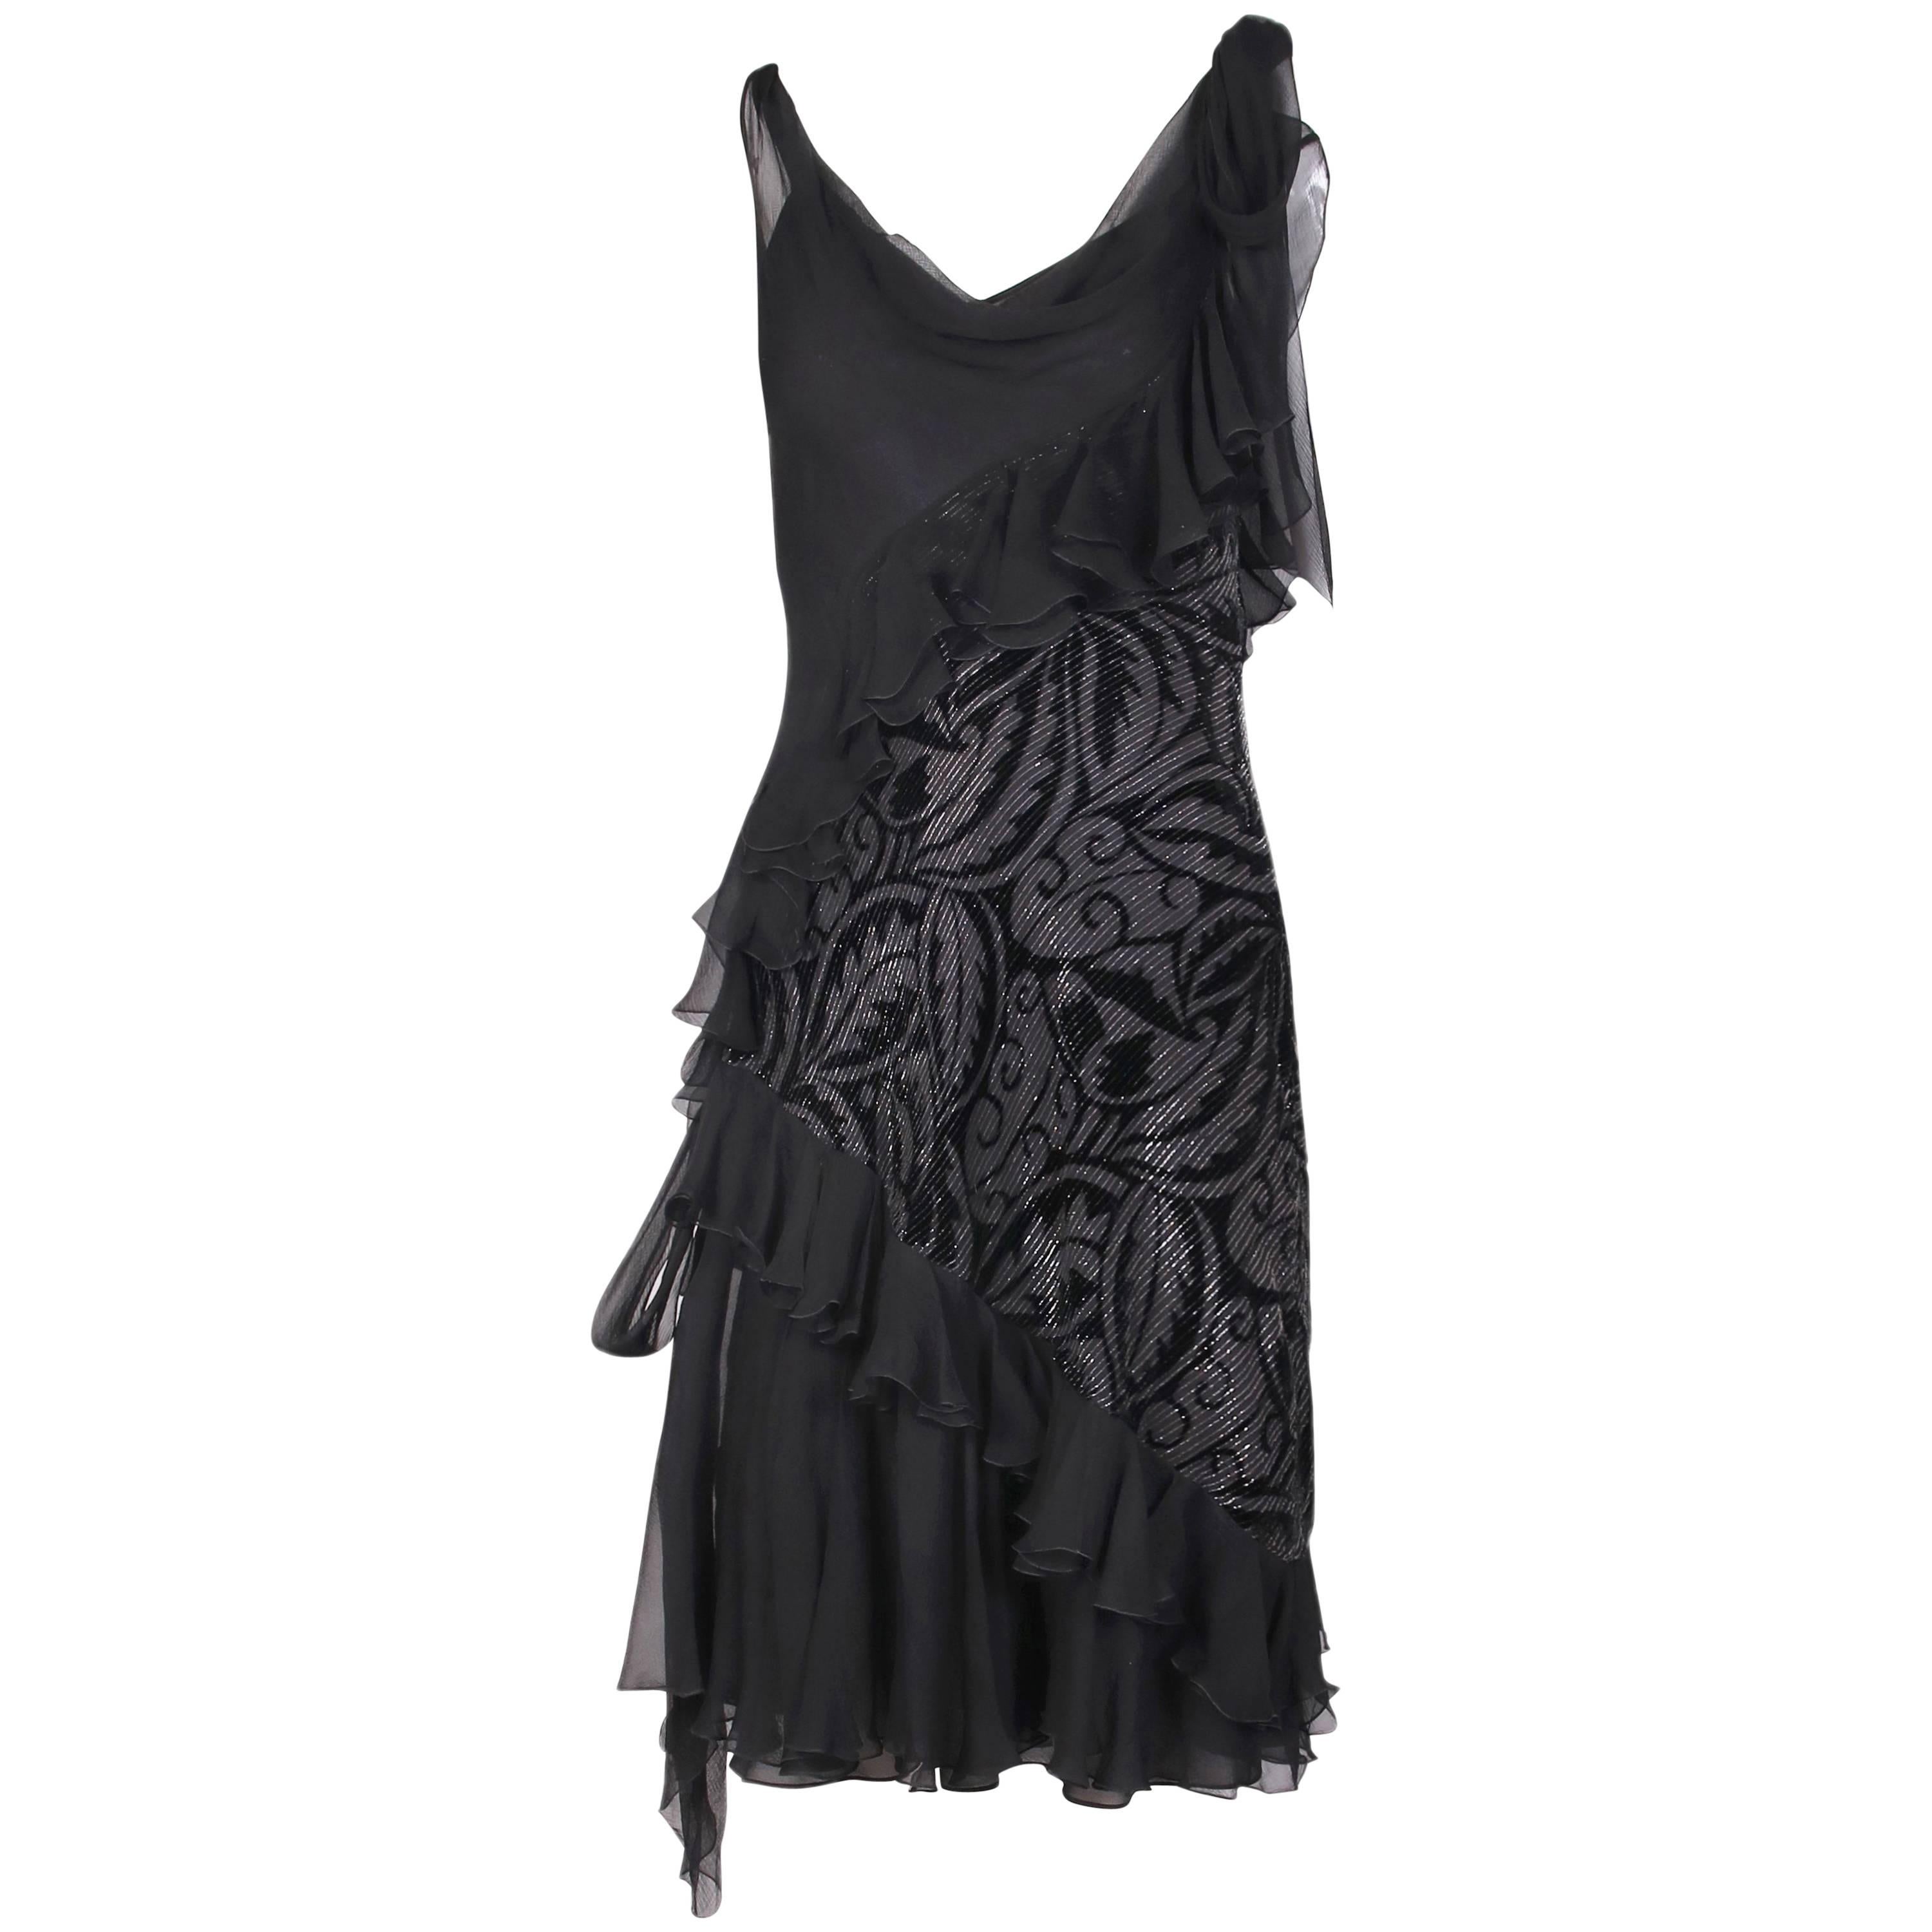 Vintage John Galliano bias cut black silk and silver lurex threaded cut velvet cocktail dress with cowl neckline, diagonal ruffles and long silk ties at a single shoulder and its opposite hip. Comes with a silk slip underneath. In excellent